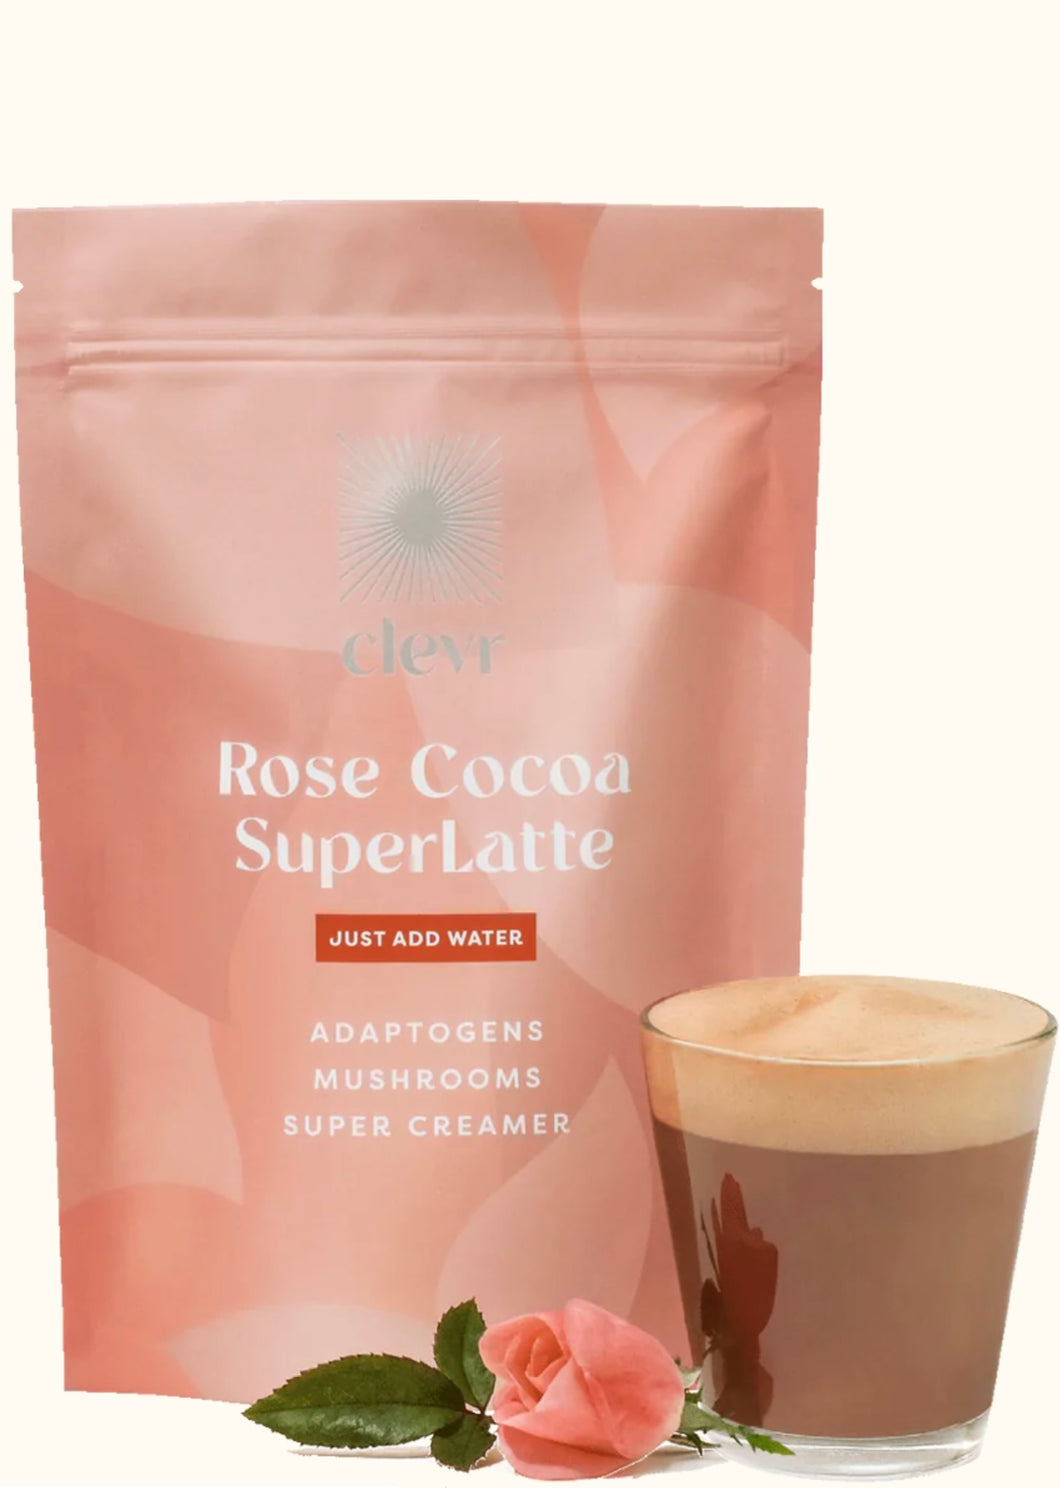 Clevr Rose Cocoa Super Latte with Reishi and Lions Mane